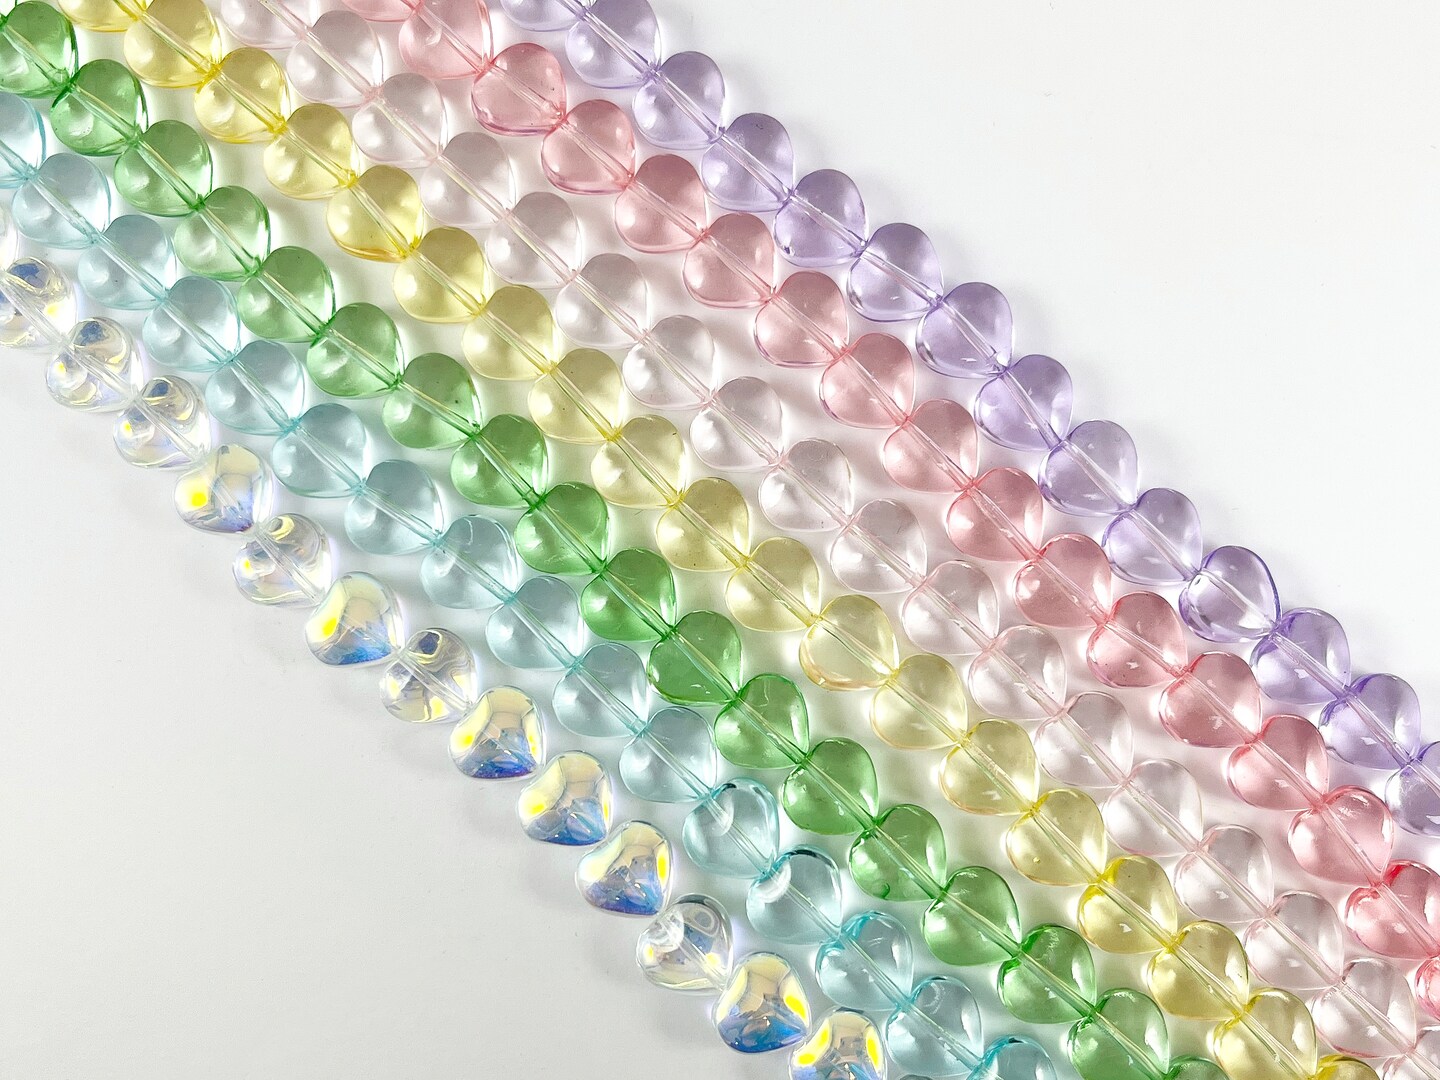 10mm Heart Shape Colorful Dyed Glass Beads Cute Transparent Glass Beads | 7 Colors Available Heart Beads for Valentine's Day Jewelry Making. 1 Strand